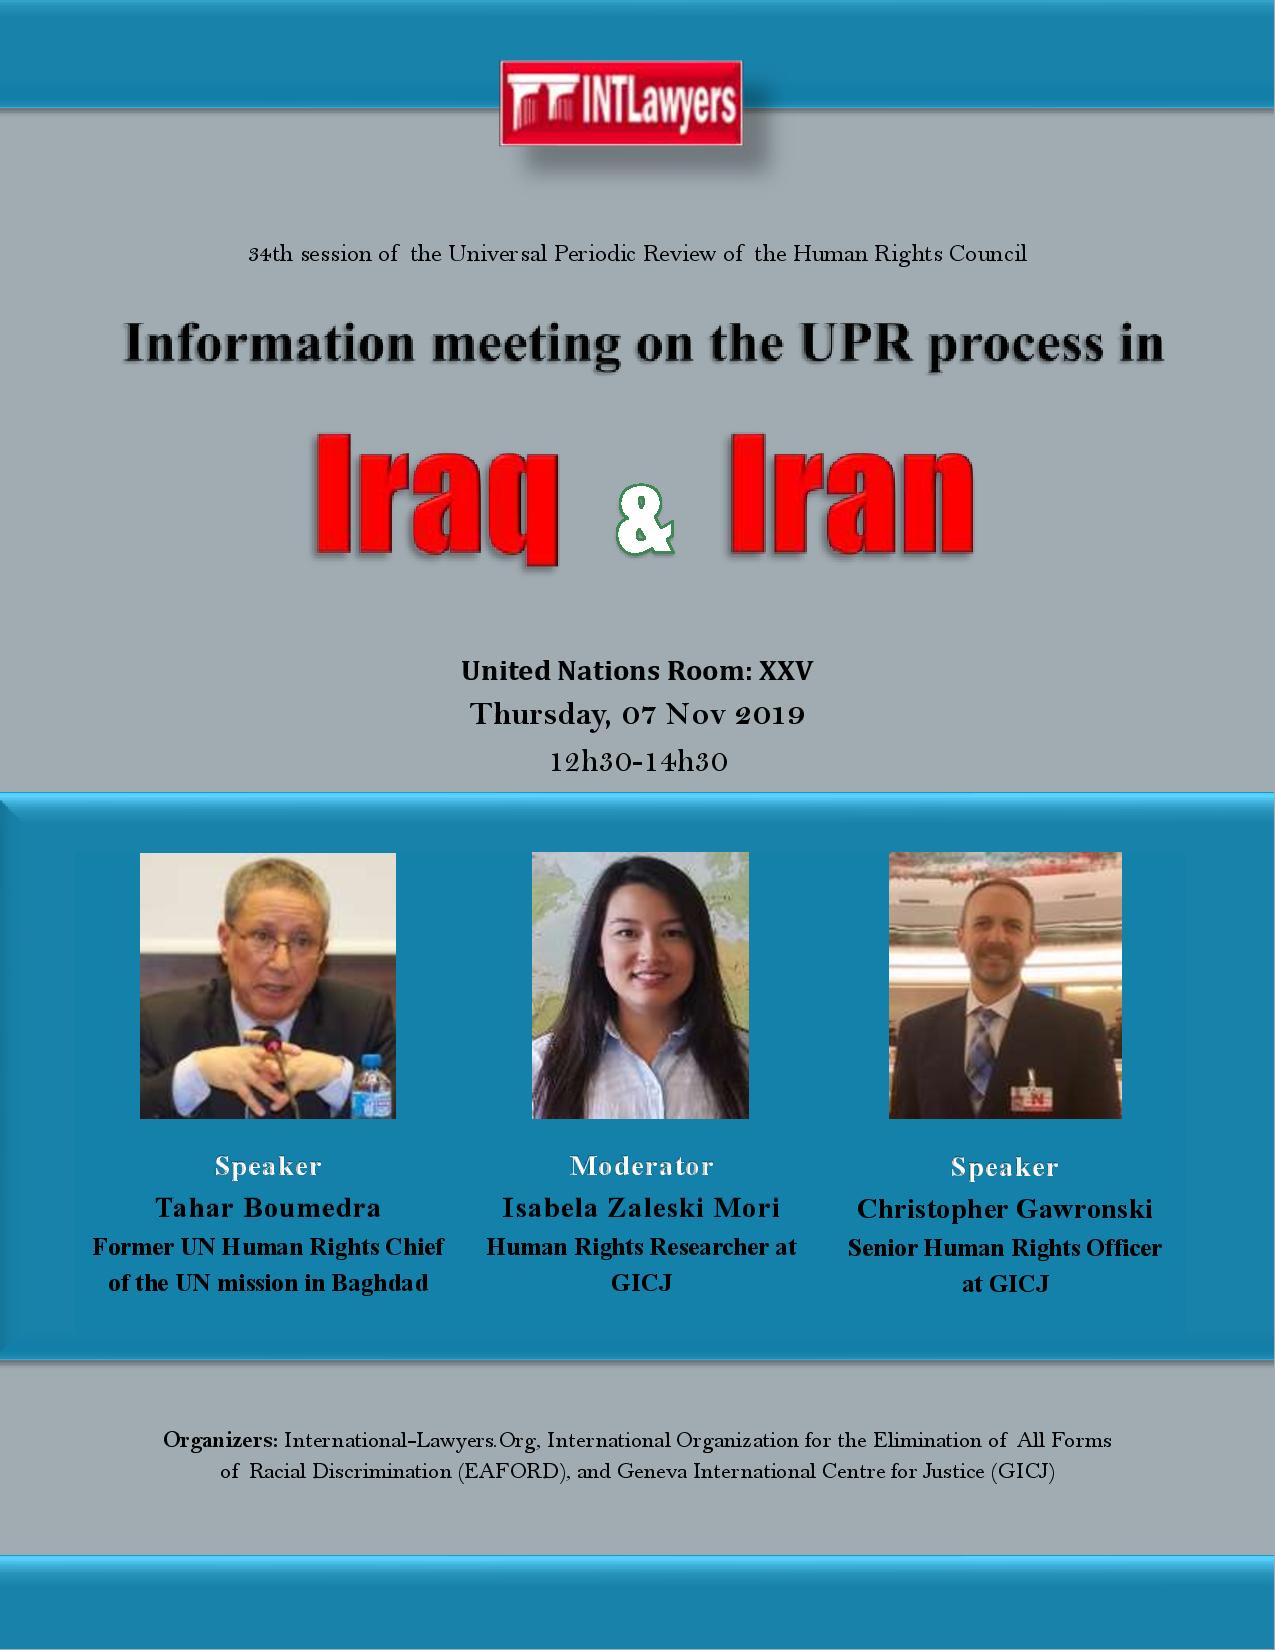 Information meeting on the UPR process in Iraq & Iran - 34th Session of the UPR